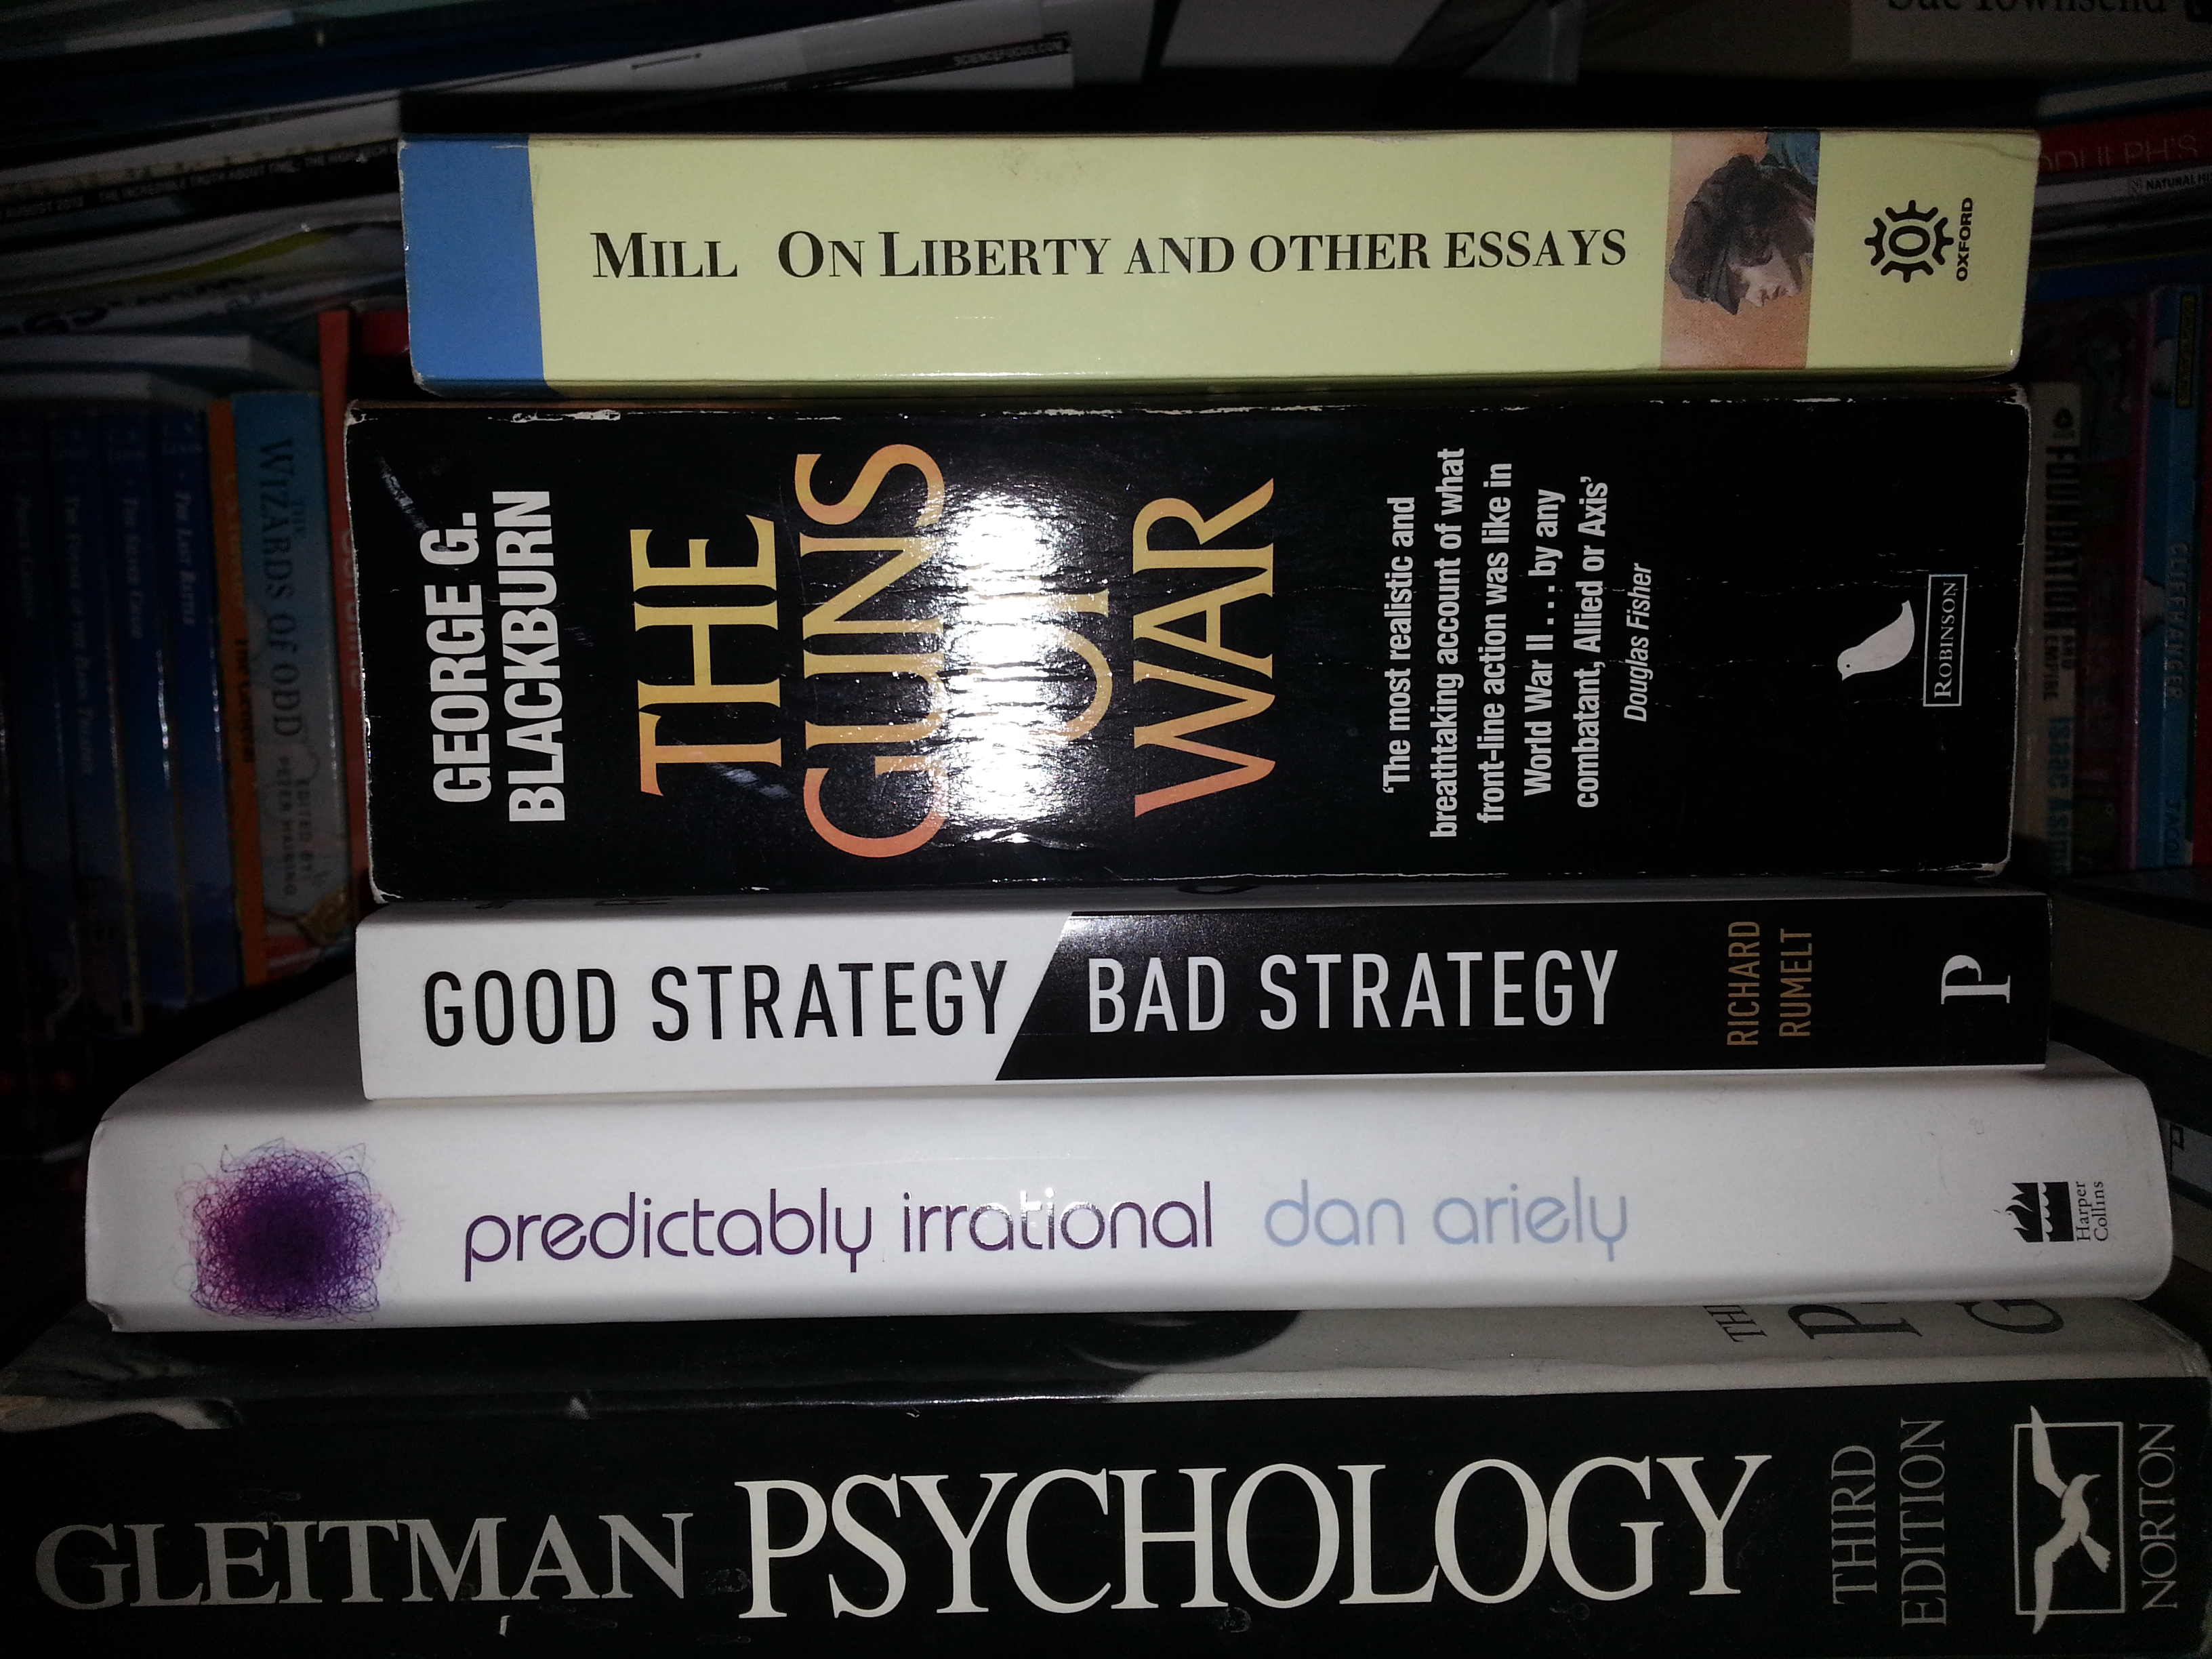 Some of my most influential books